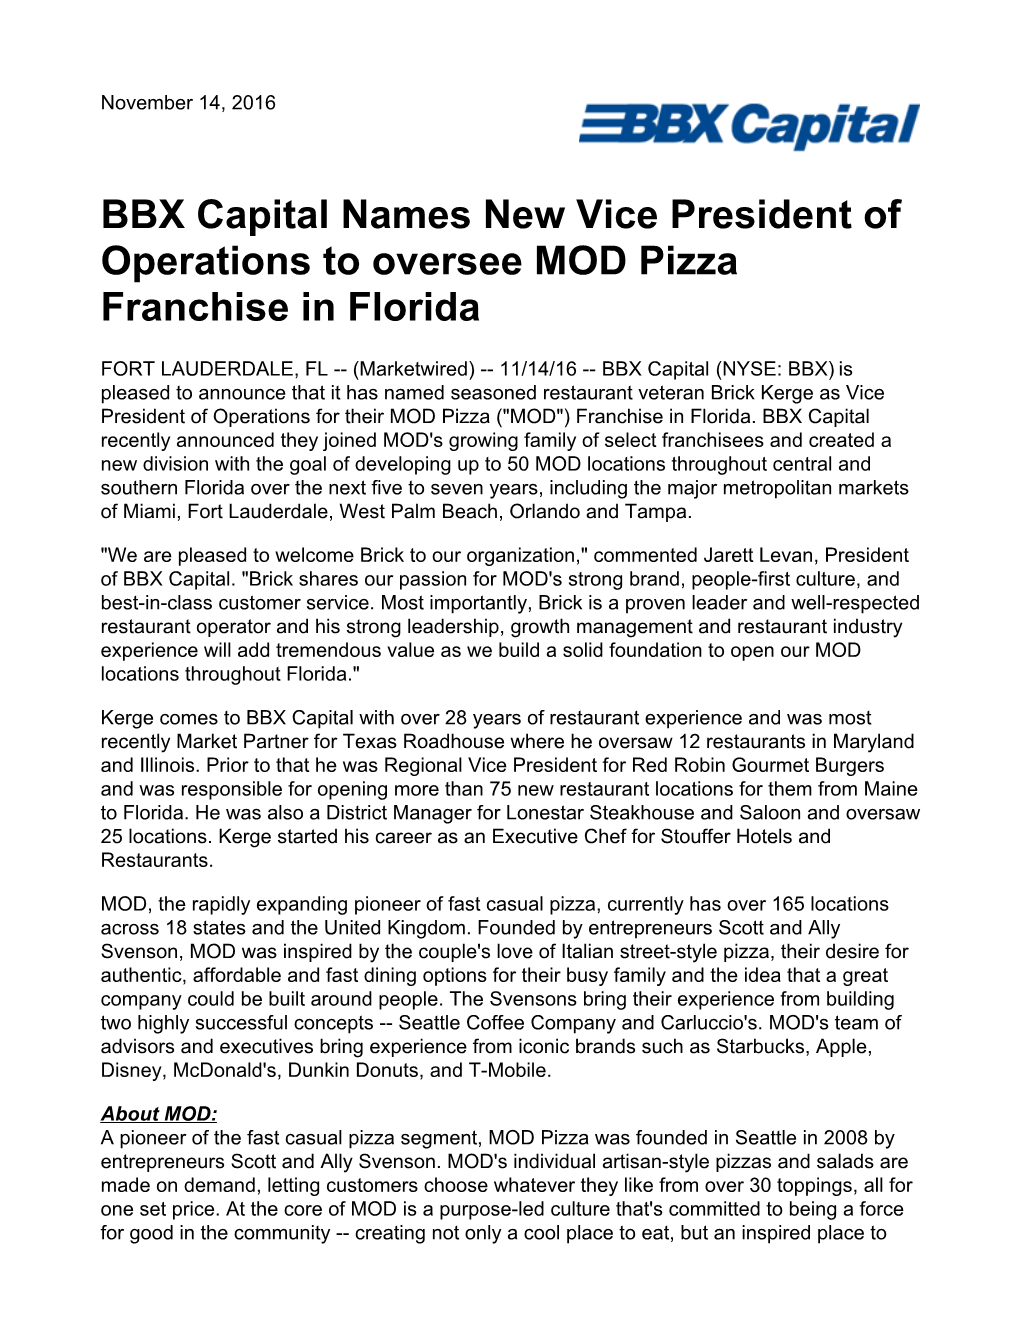 BBX Capital Names New Vice President of Operations to Oversee MOD Pizza Franchise in Florida